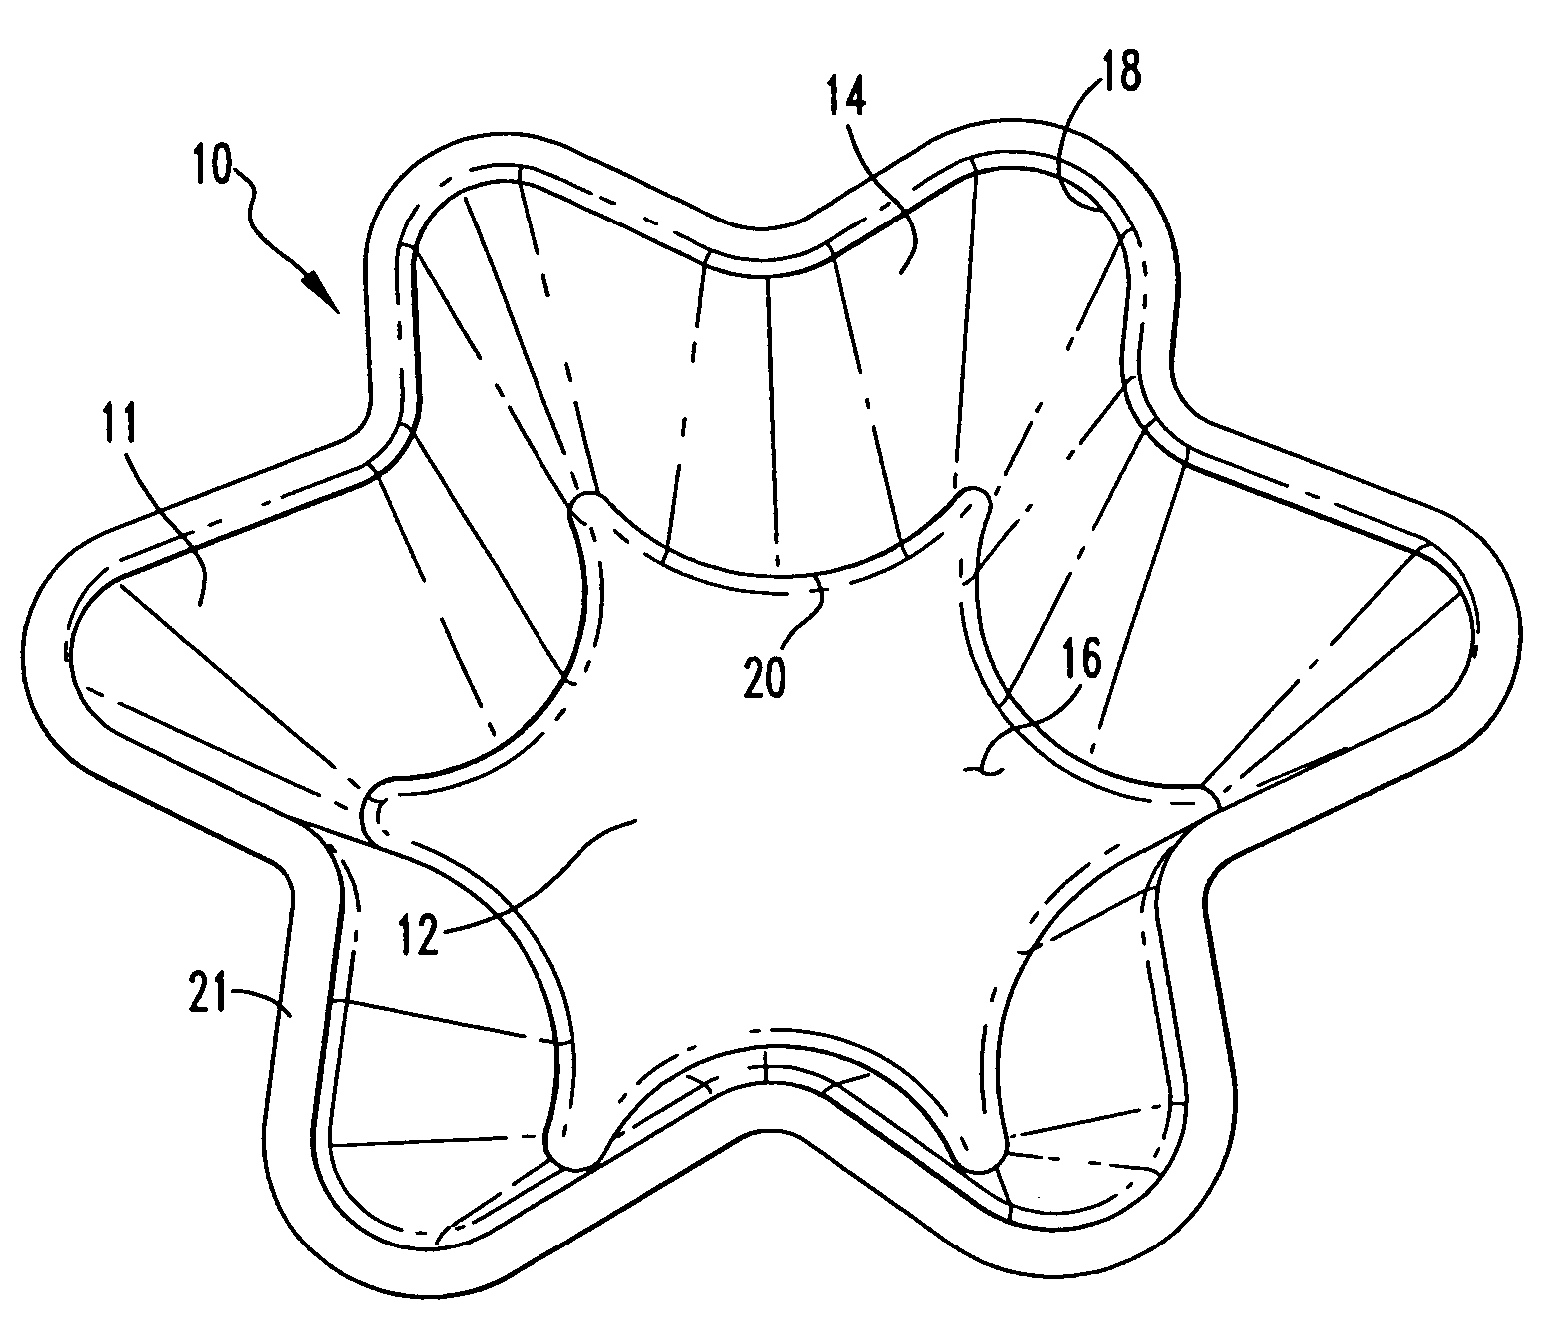 Stand-alone self-supporting disposable baking containers and methods of manufacture